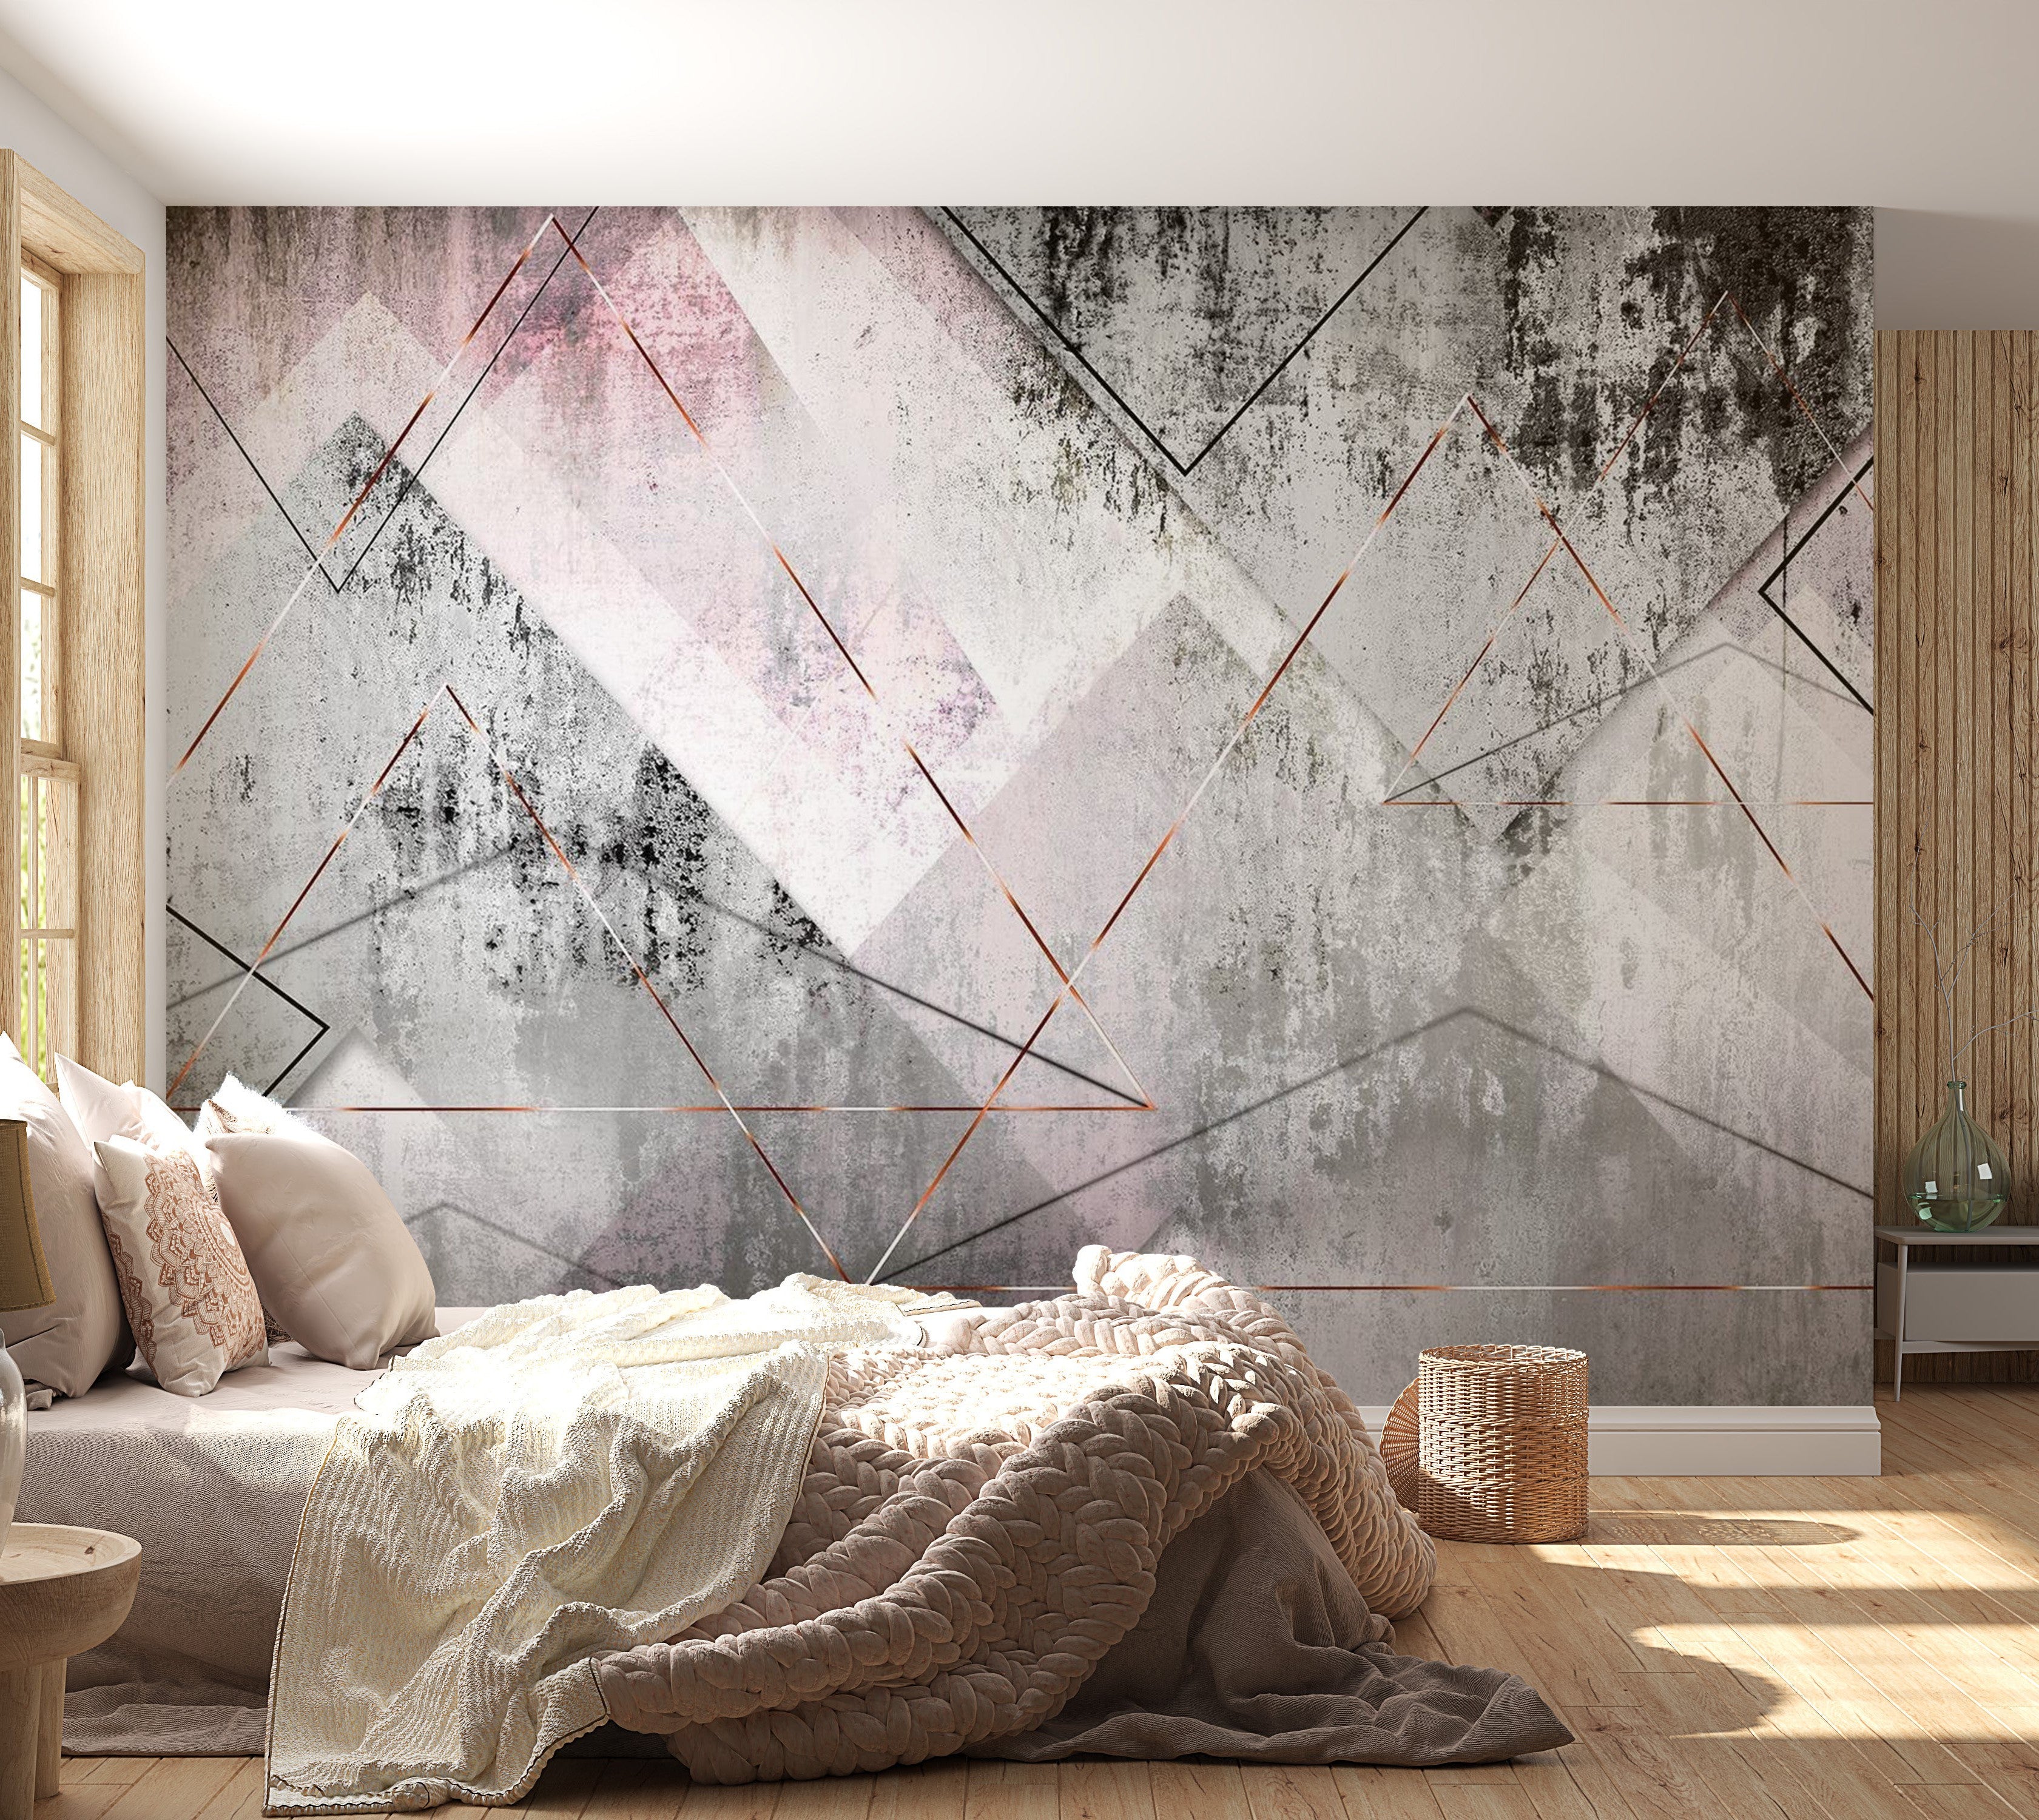 Peel & Stick Wall Mural - Triangular Copper Concrete Art - Removable Wall Decals